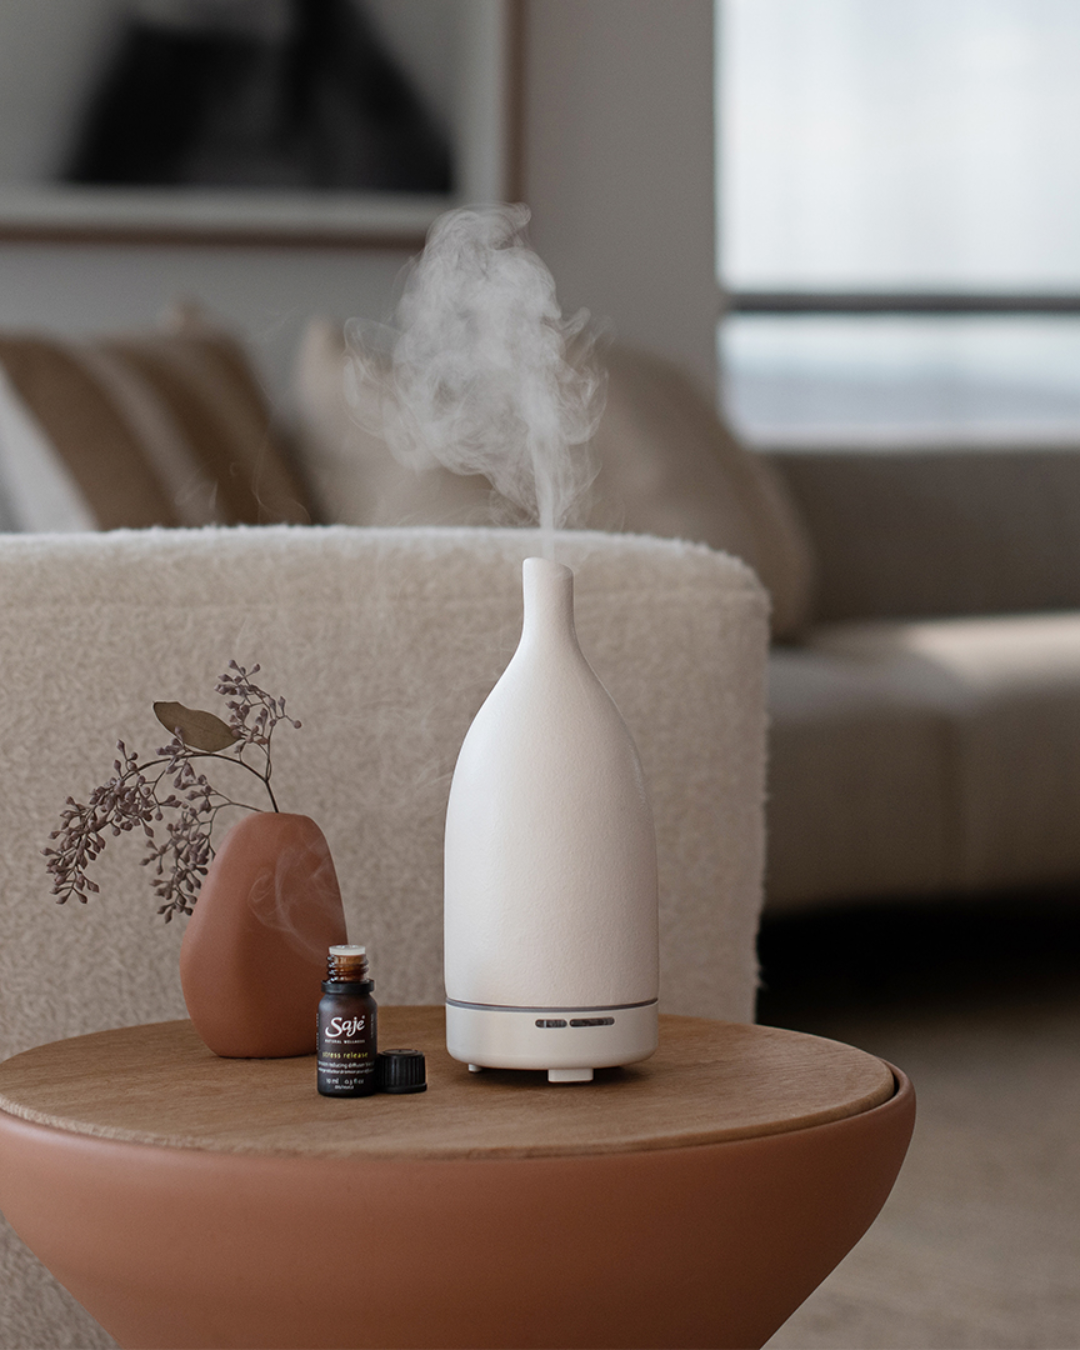 A white aroma diffuser on a table.